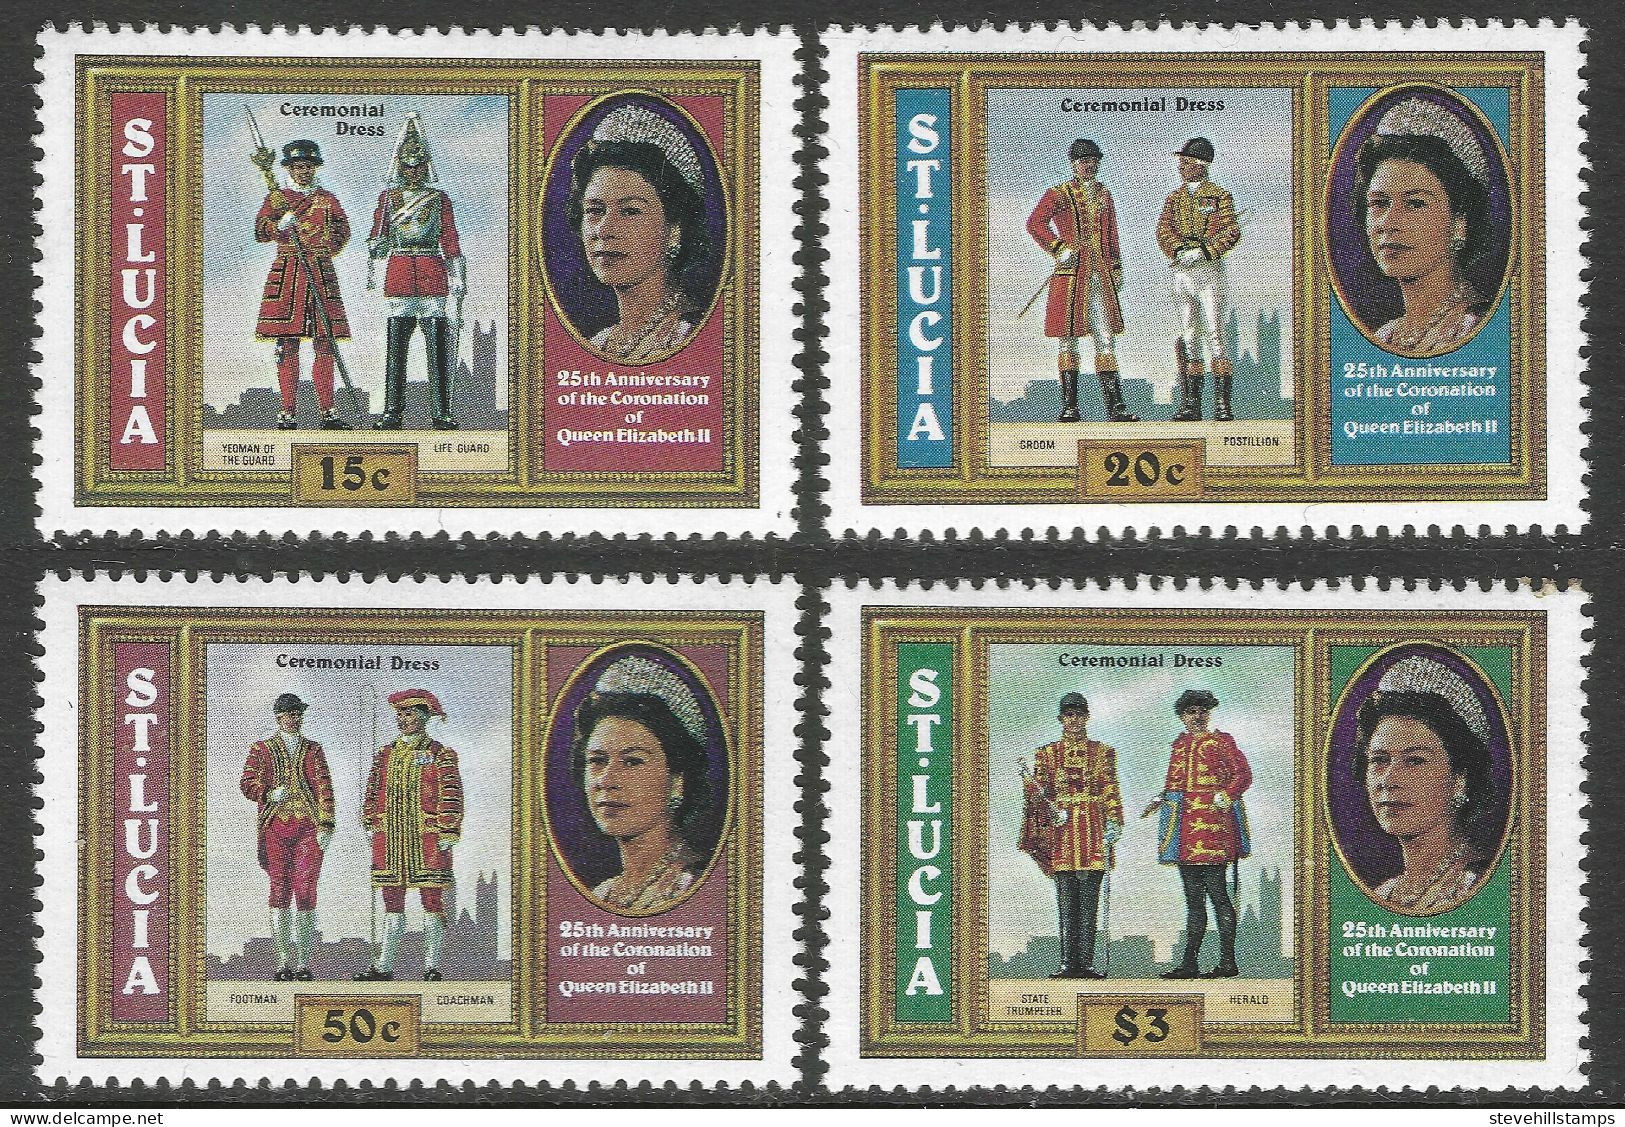 St Lucia. 1978 25th Anniv Of Coronation. MH Complete Set (excl Miniature Sheet). SG 468-471. M3154 - Ste Lucie (...-1978)